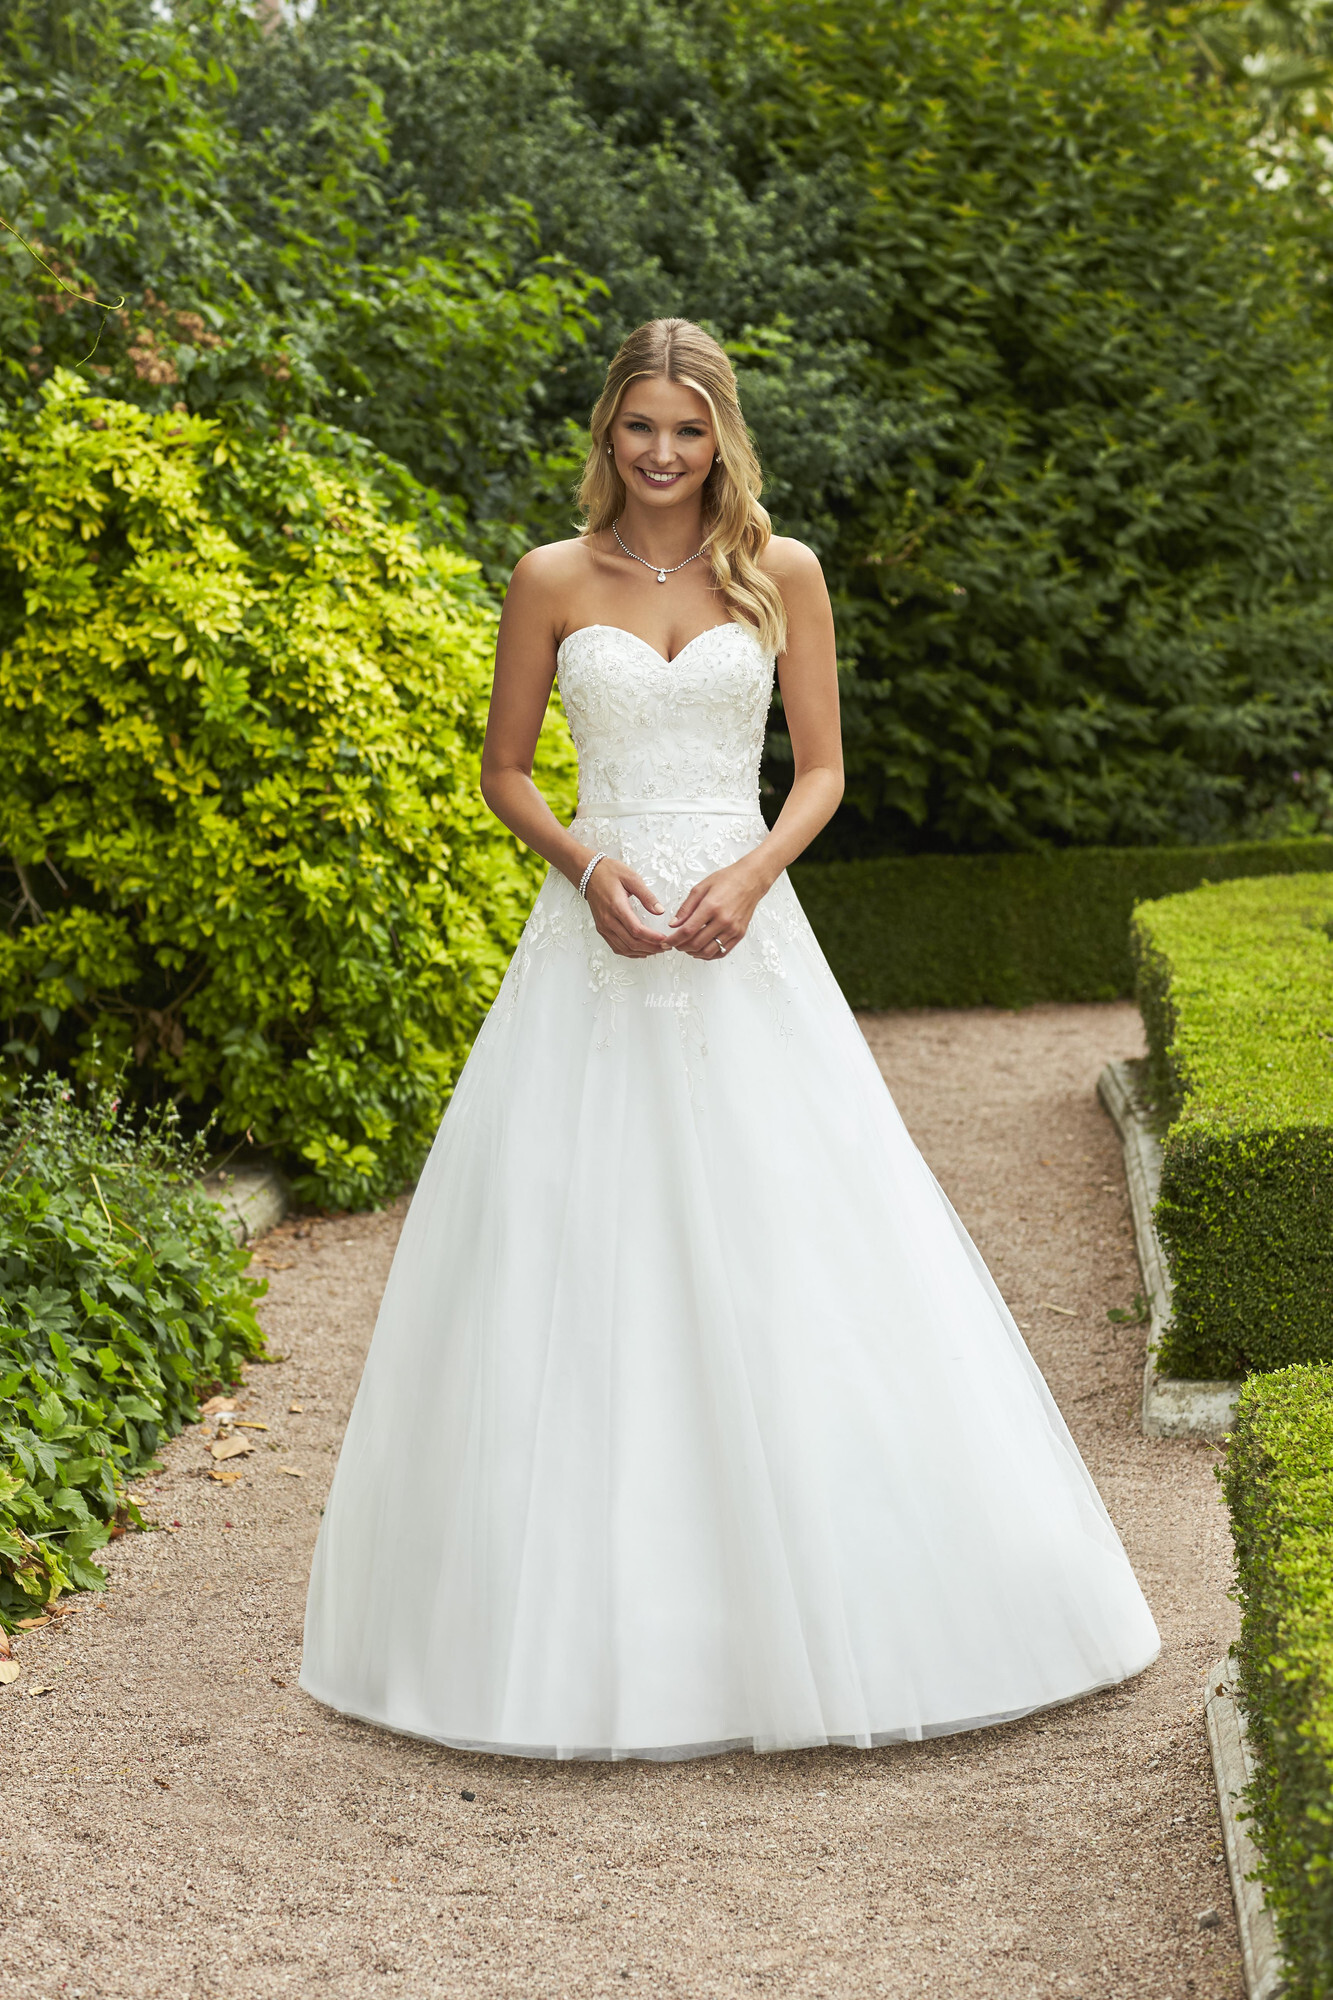 Princess Wedding Dresses & Bridal Gowns | hitched.co.uk